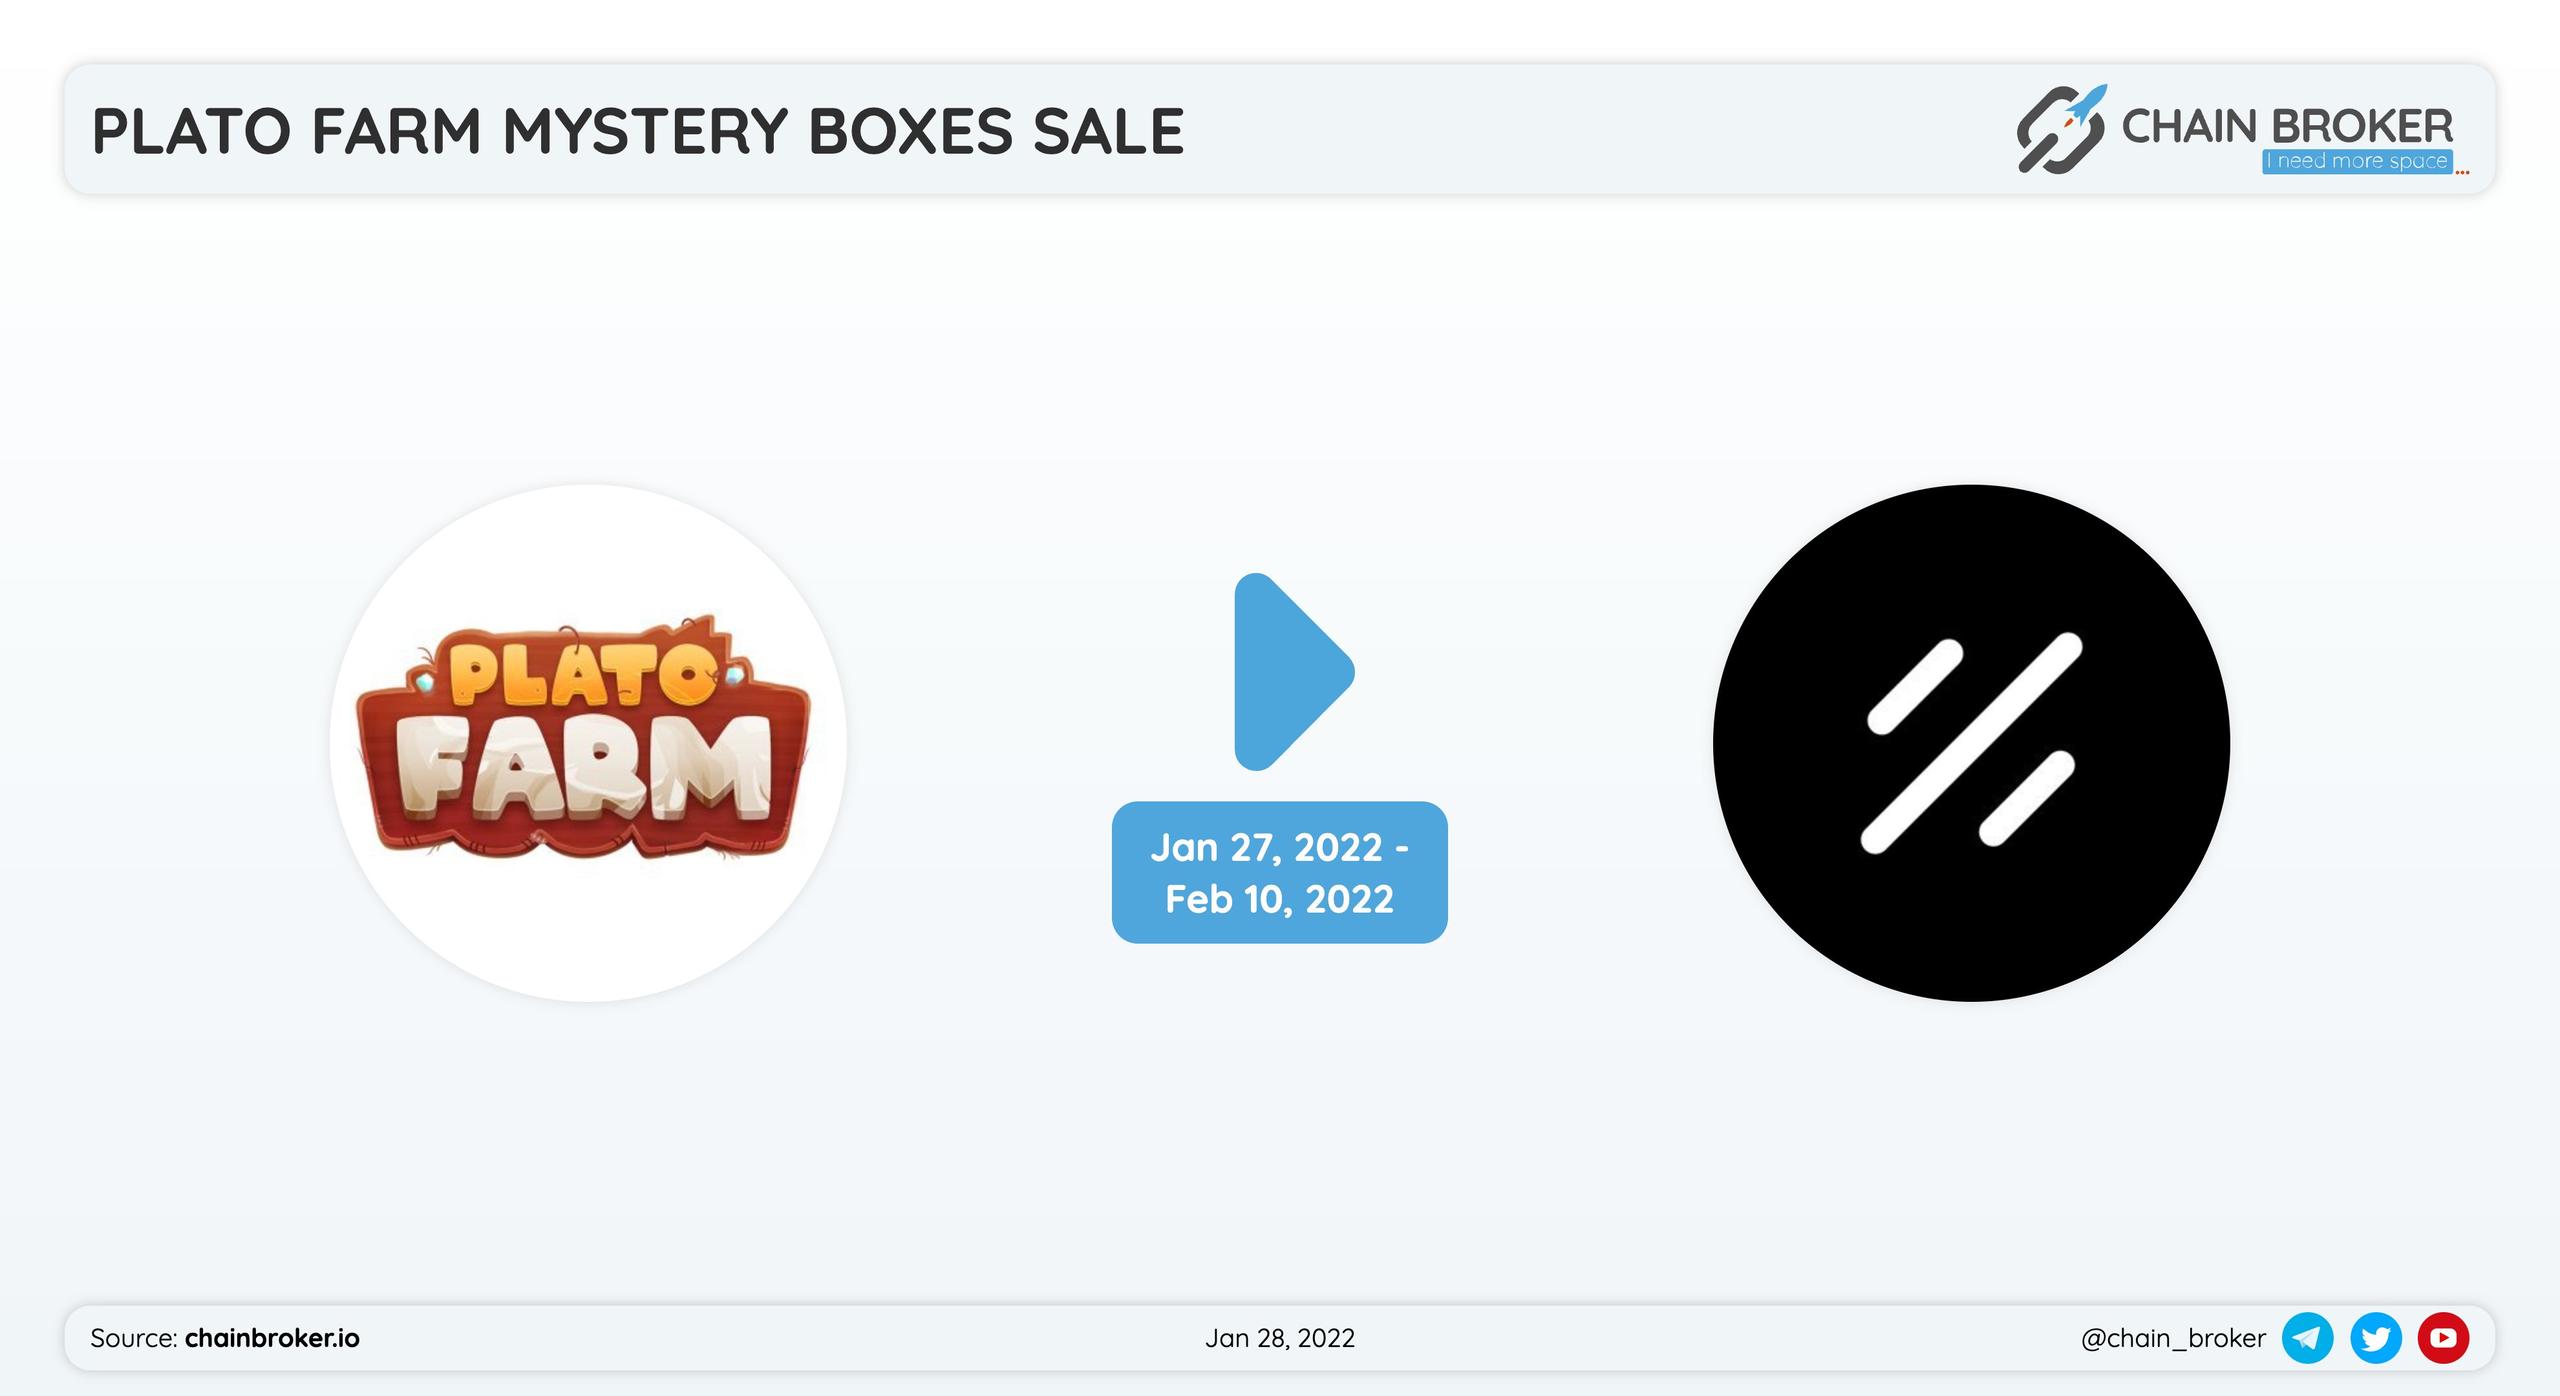 Plato Farm has partnered with Project Galaxy for a mystery box sale.